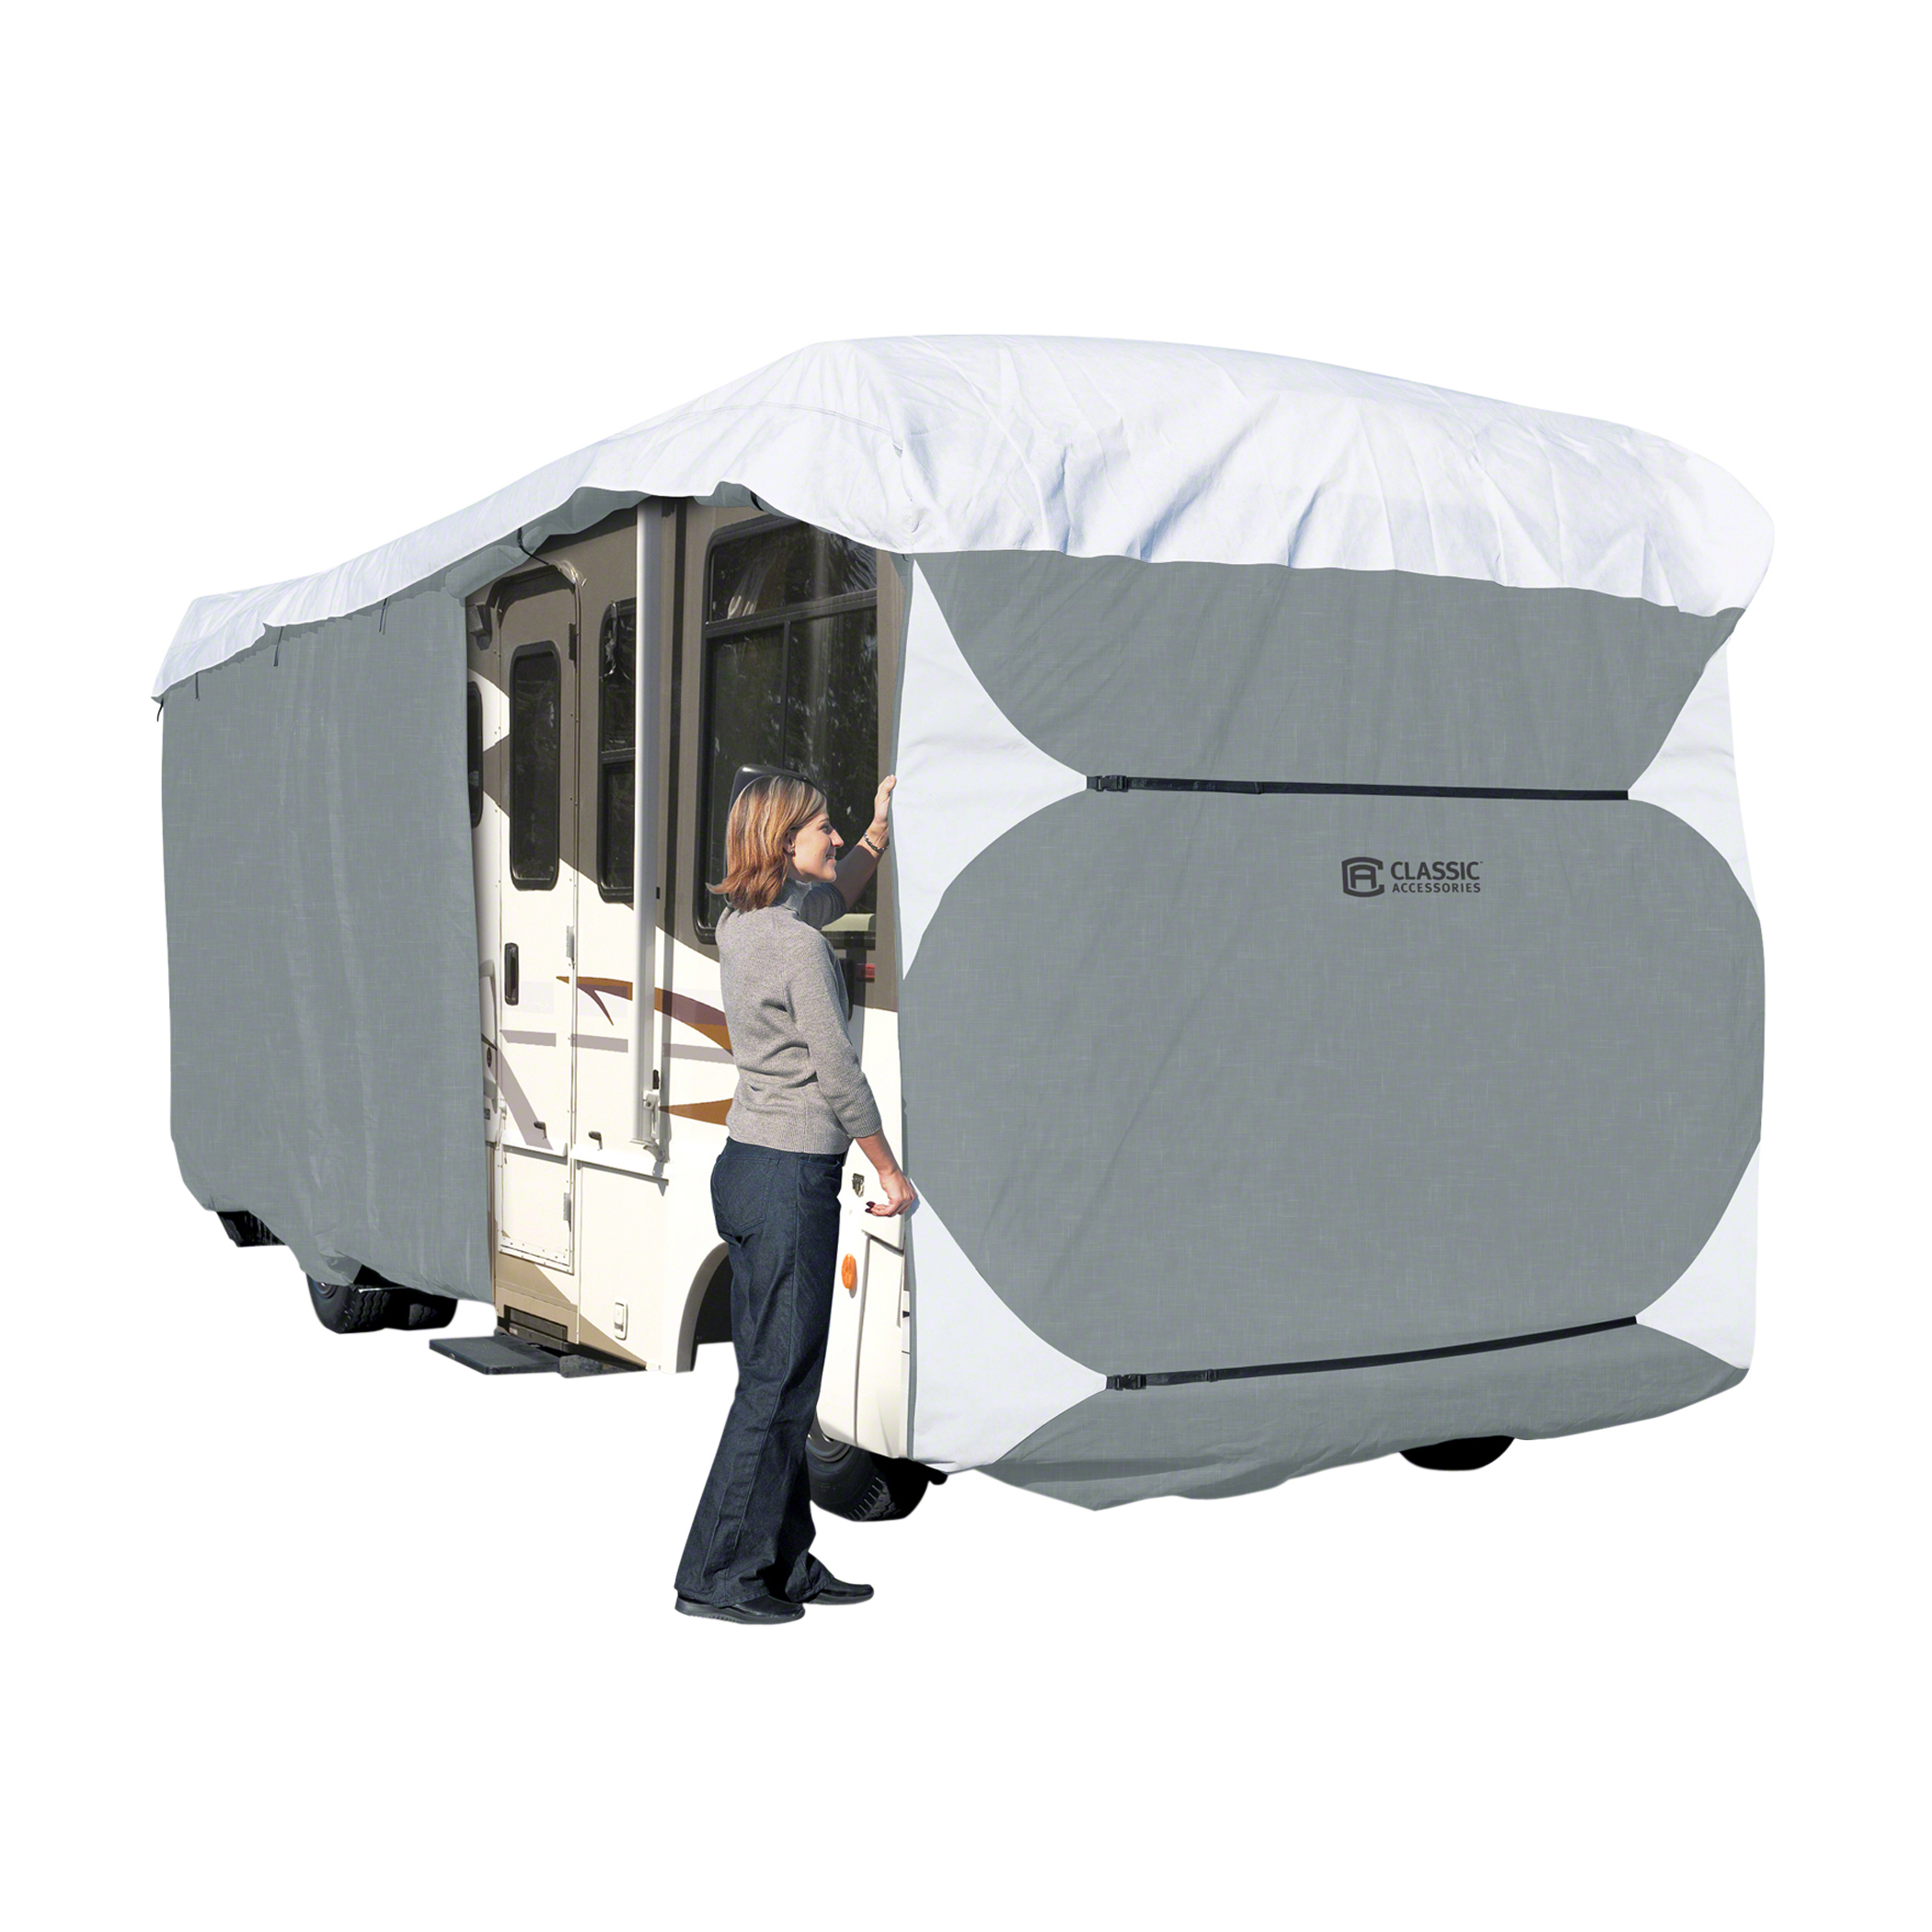 Classic Accessories OverDrive PolyPRO 3 Deluxe Class A RV Cover, Fits 33' - 37' RVs - Max Weather Protection with 3-Ply Poly Fabric Roof RV Cover (Model 6) - image 1 of 7